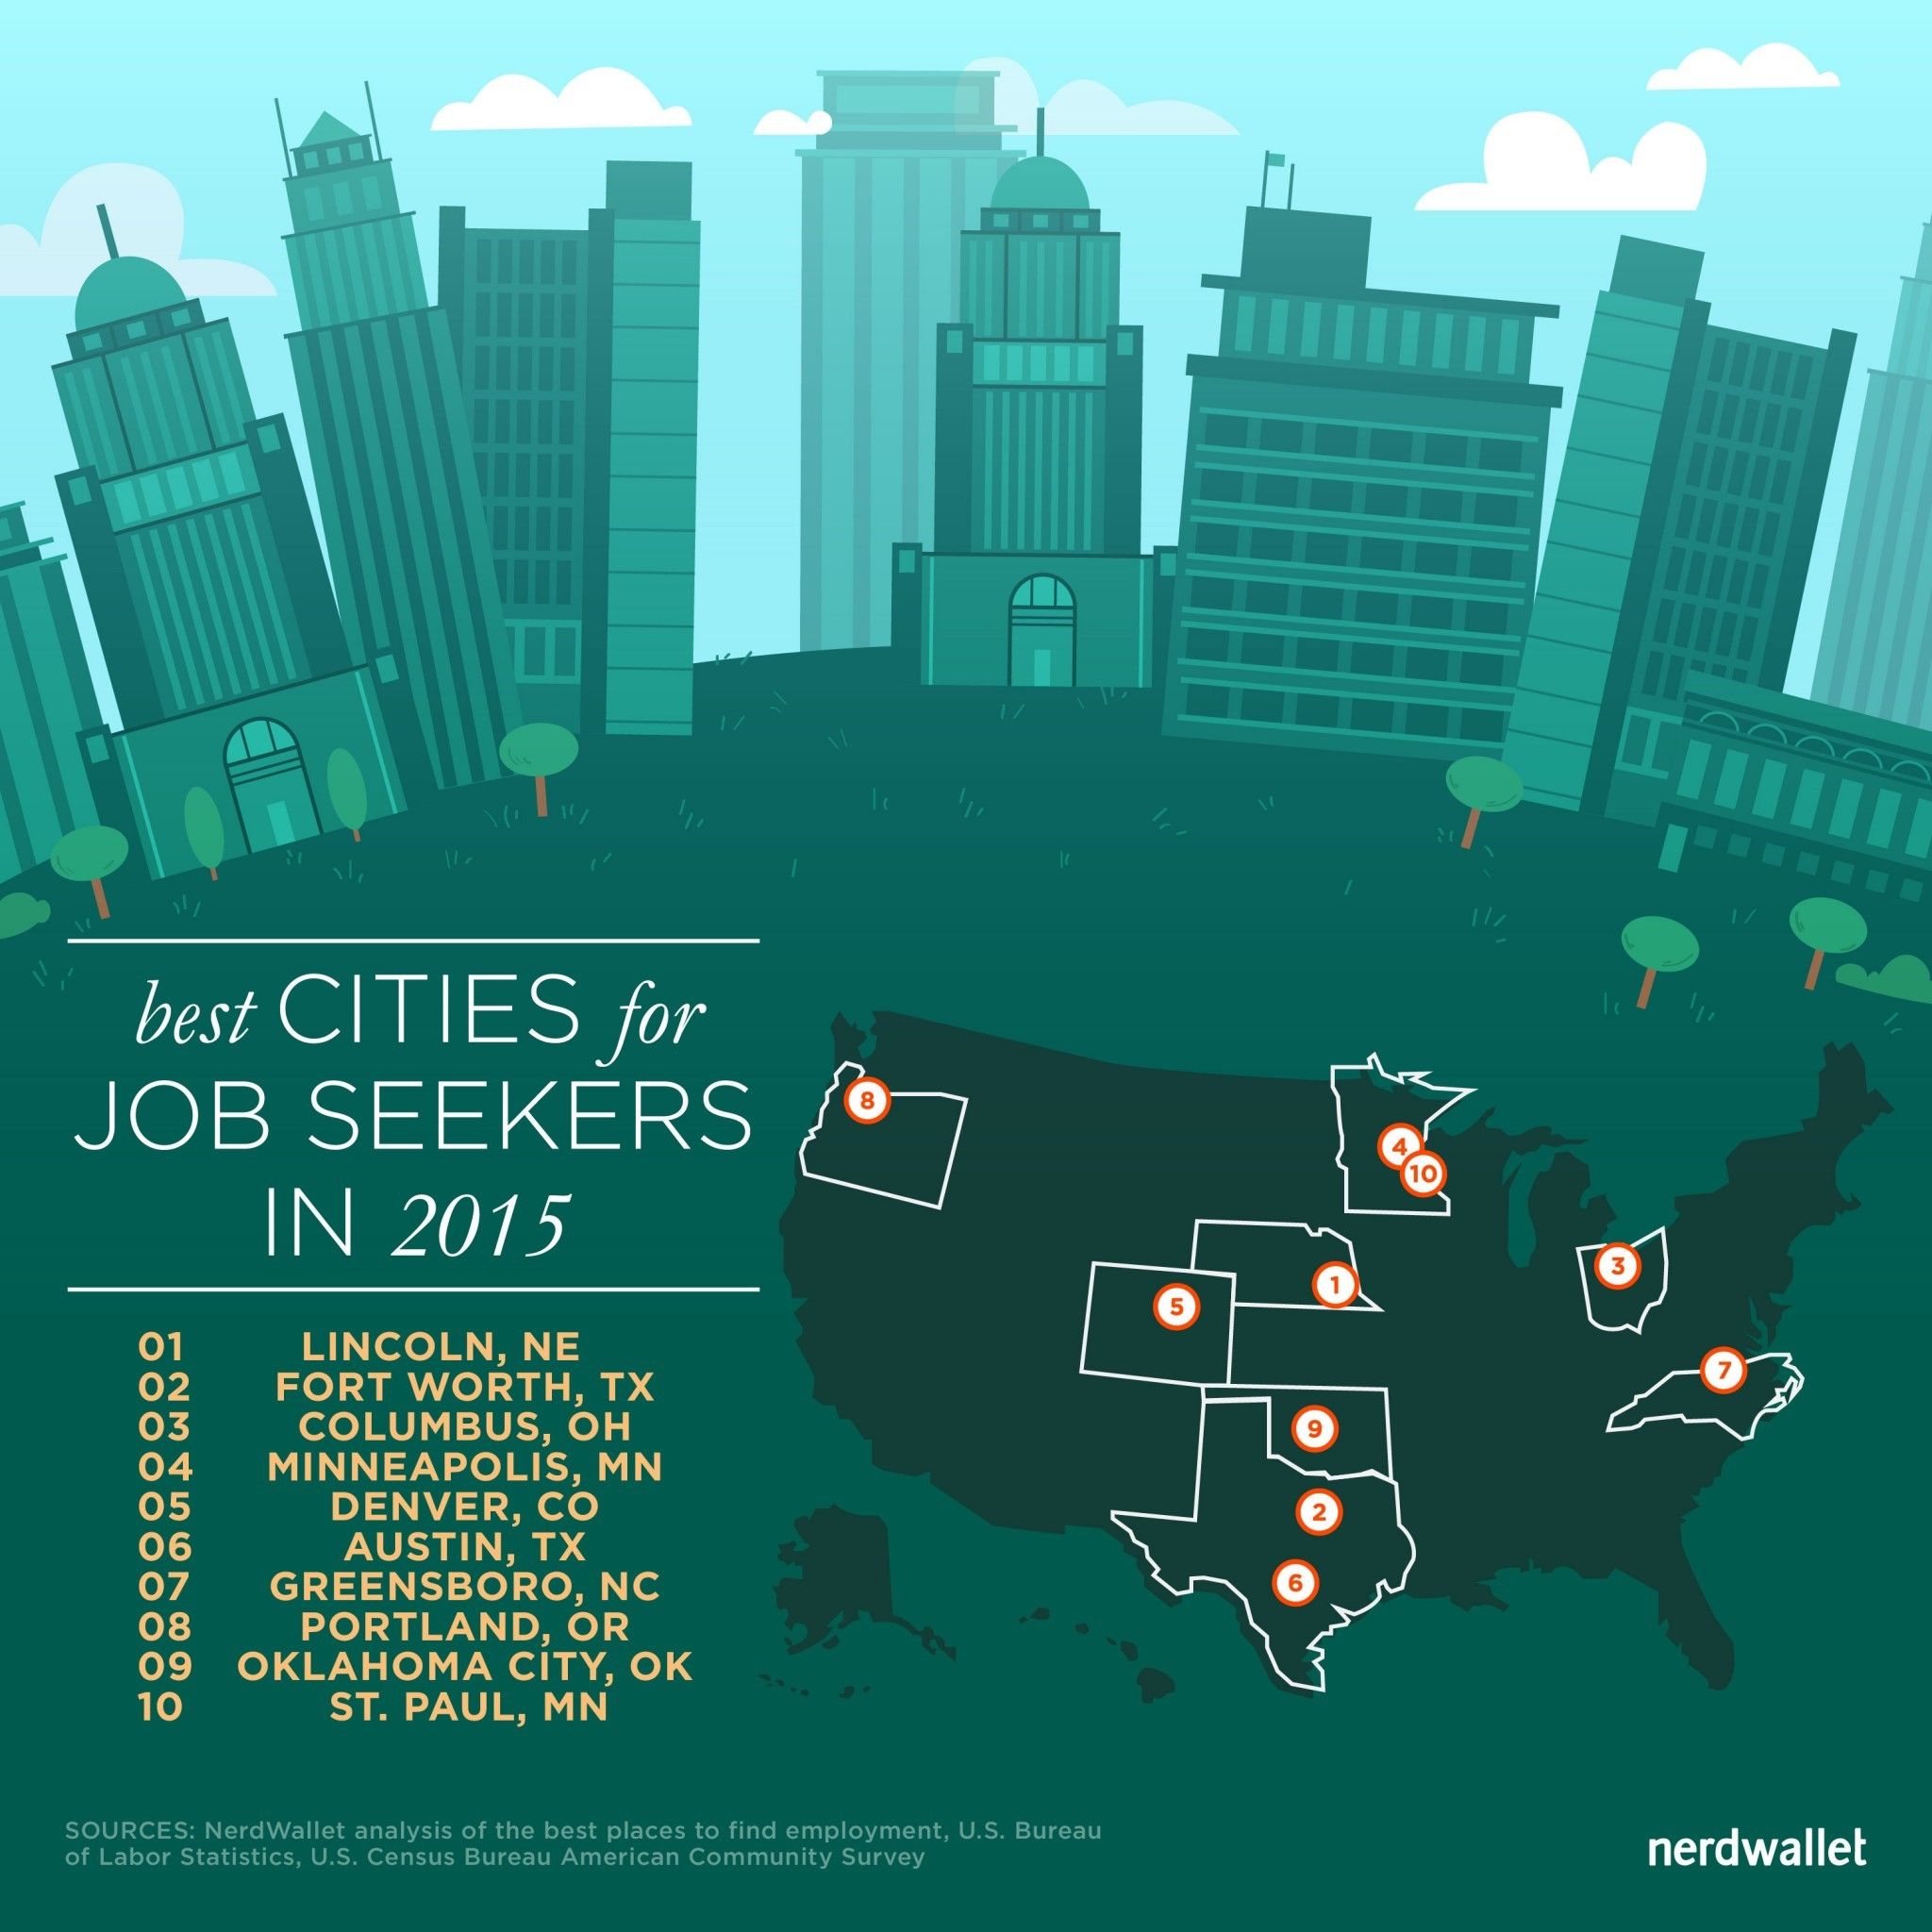 best_cities_for_job_seekers_map_1450px_011415-150ppi-01